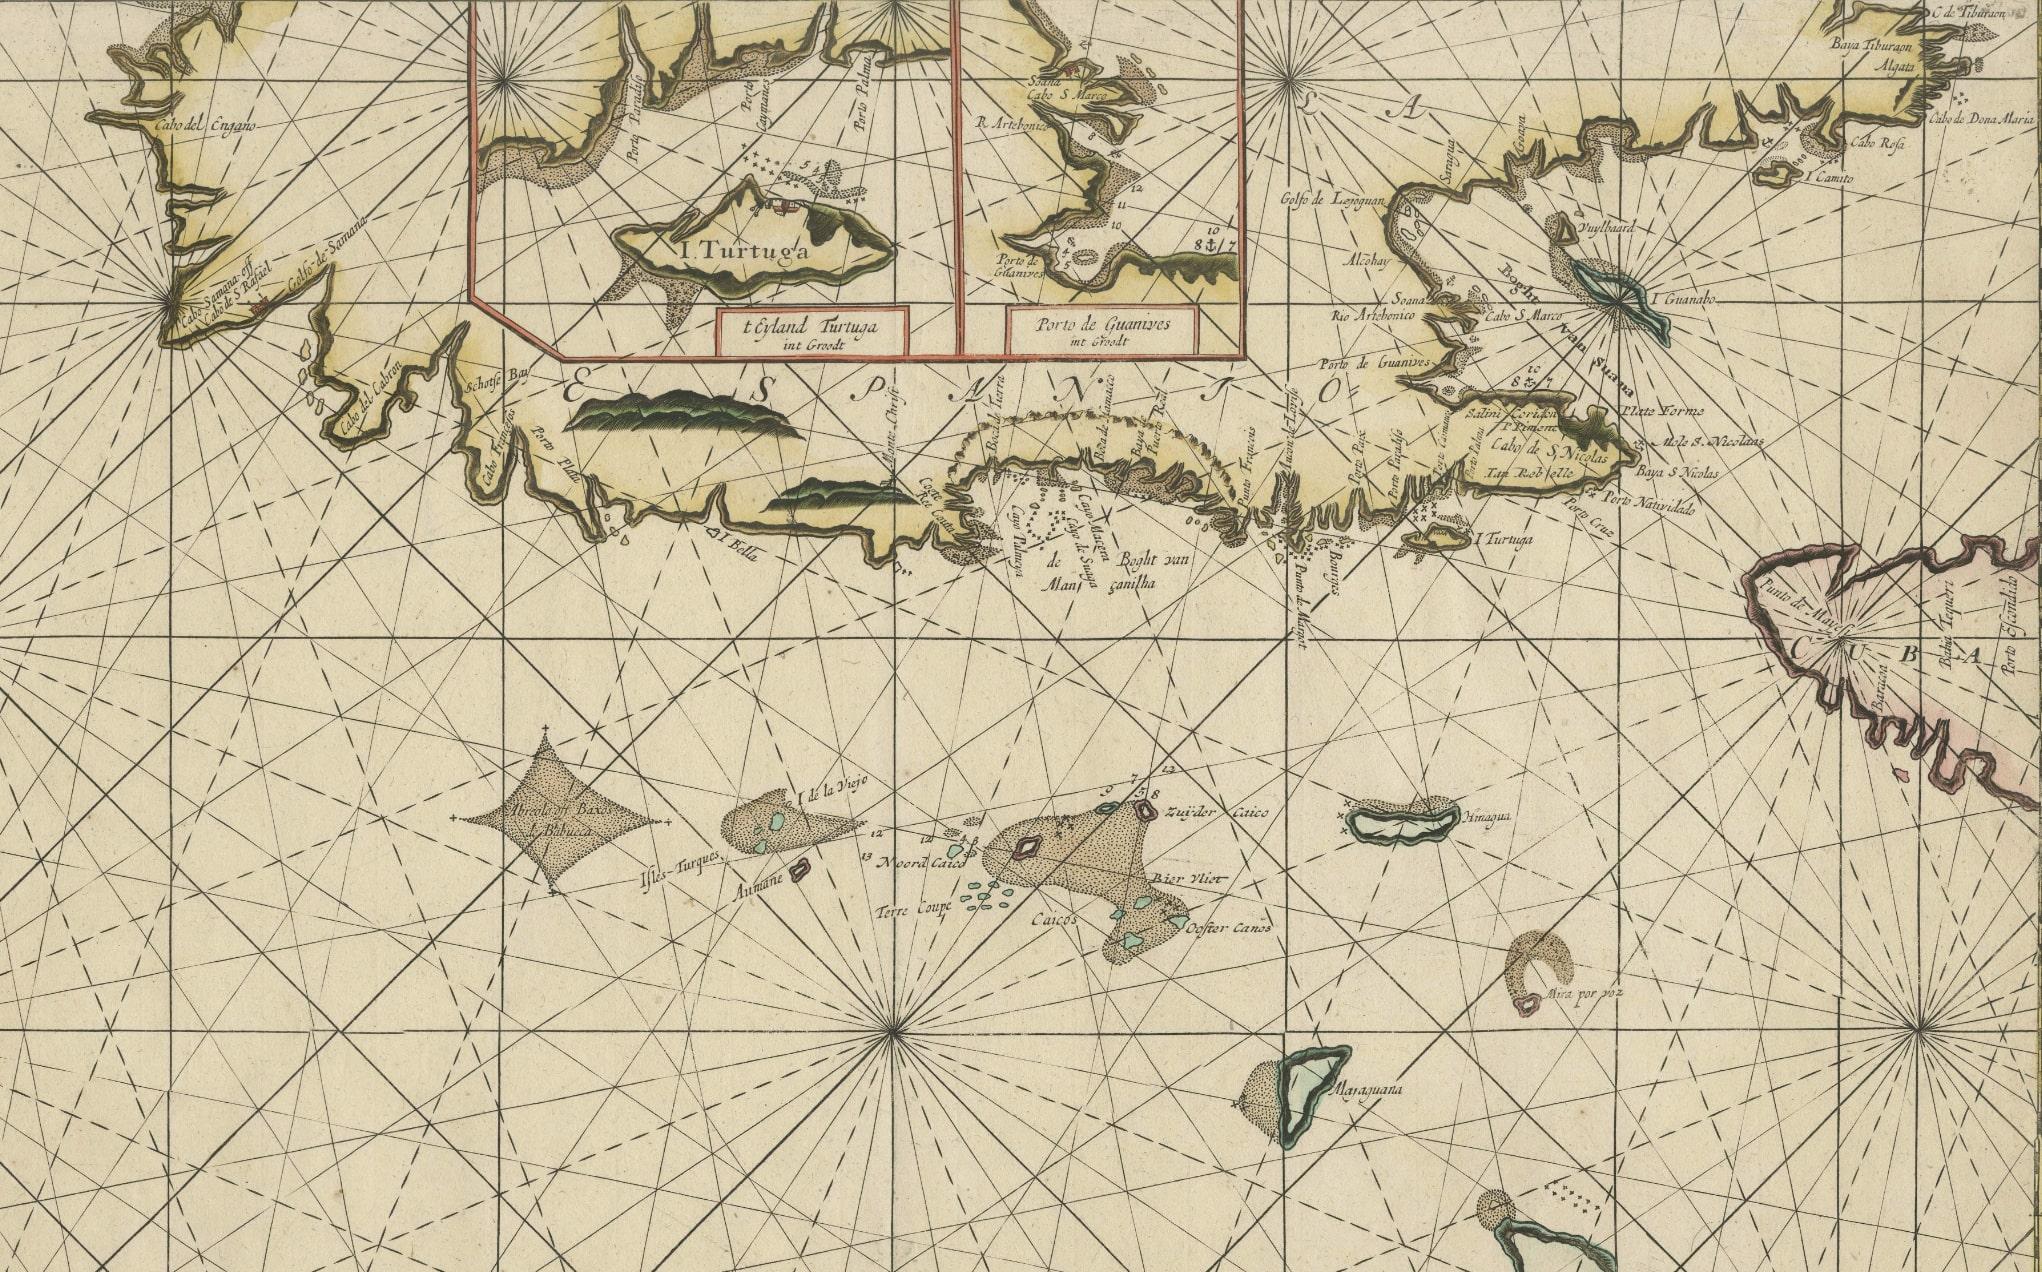 Antique map titled 'Pas kaart van de Noord Kust van Espaniola (..)'. Beautiful sea chart of the northern part of Hispaniola, western Cuba. The map includes the Turks & Caicos Islands and southern part of the Bahamas. Shows Guanahami or S. Salvador.